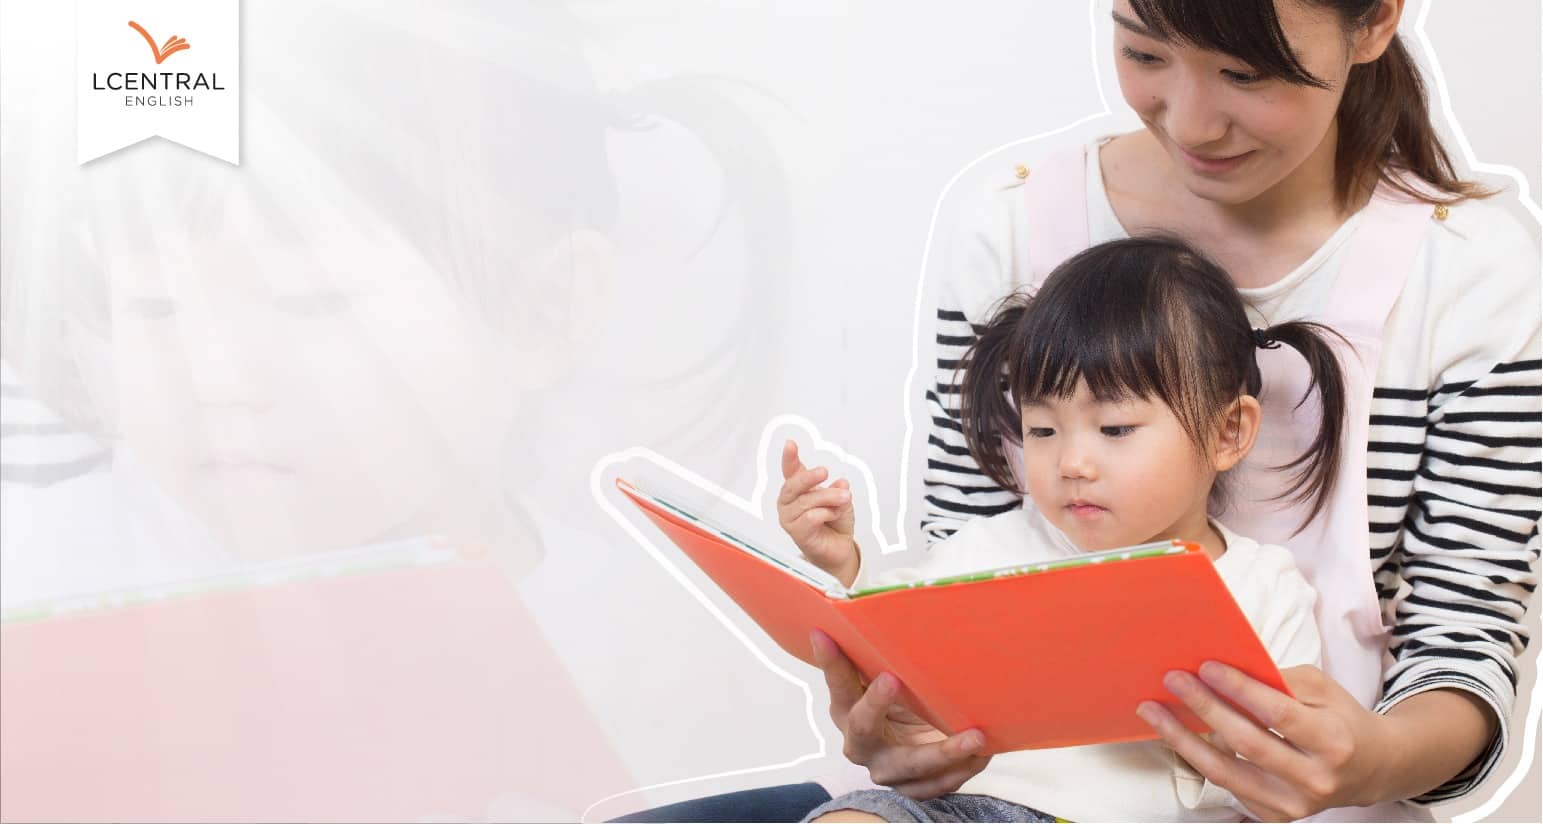 LCentral English Enrichment Tuition Singapore Developing Pre-reading Skills Motivation to read